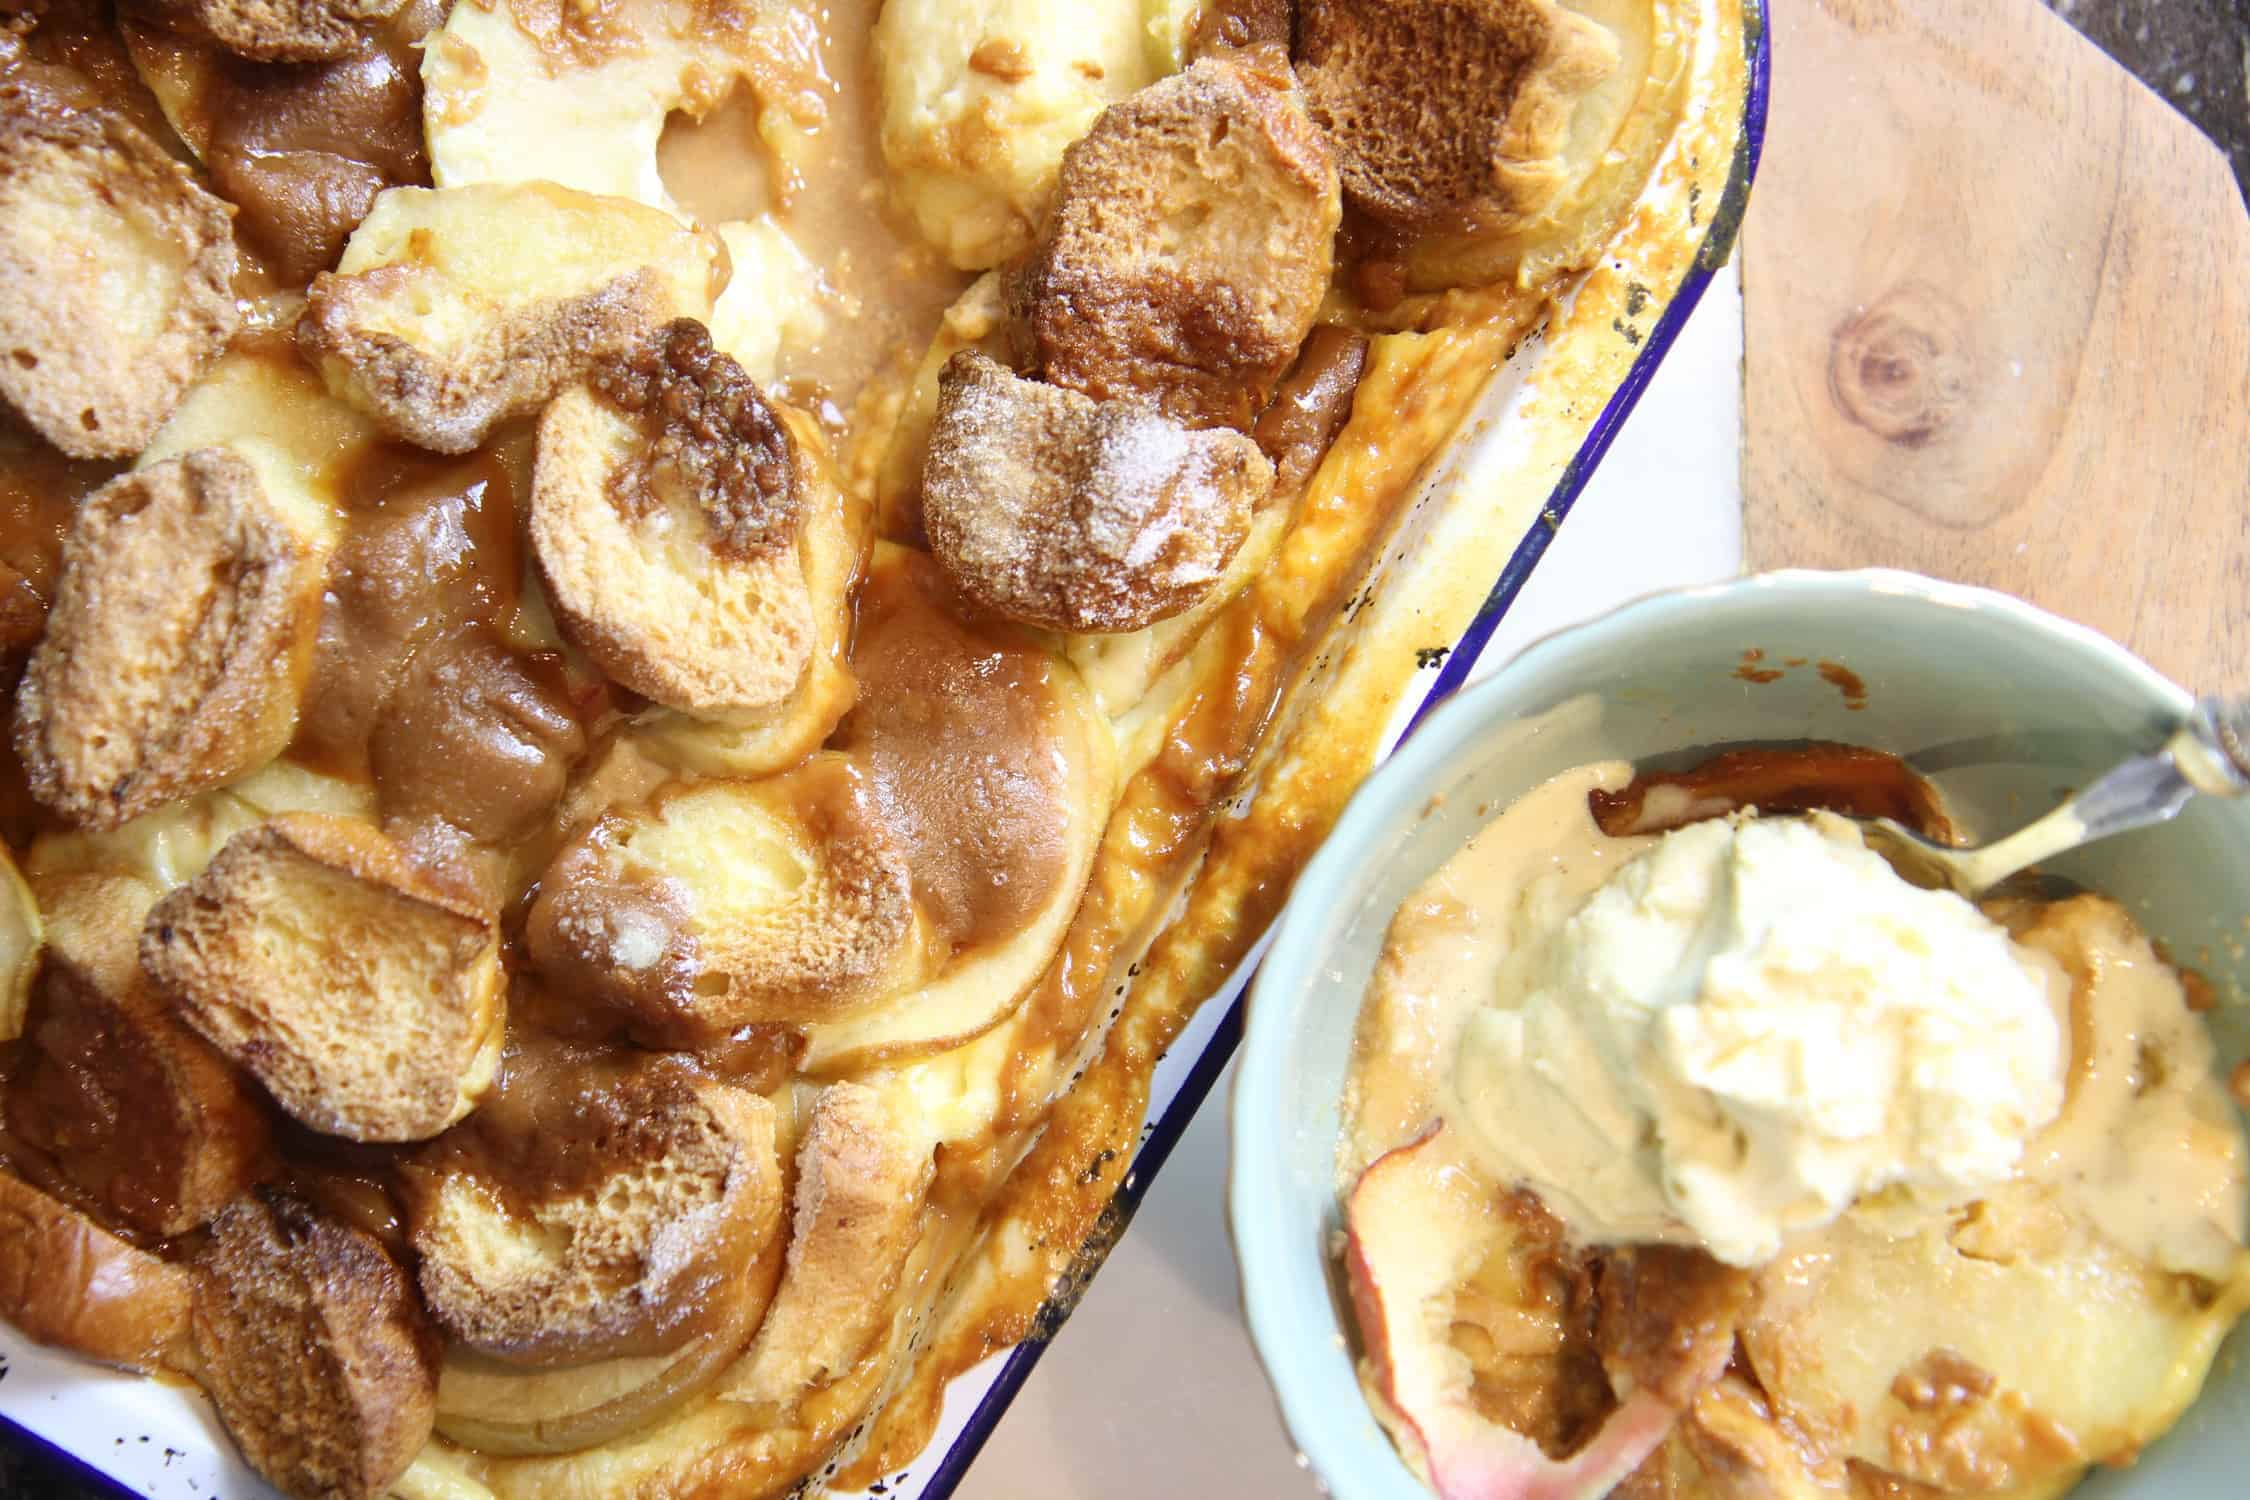 Toffee apple bread pudding